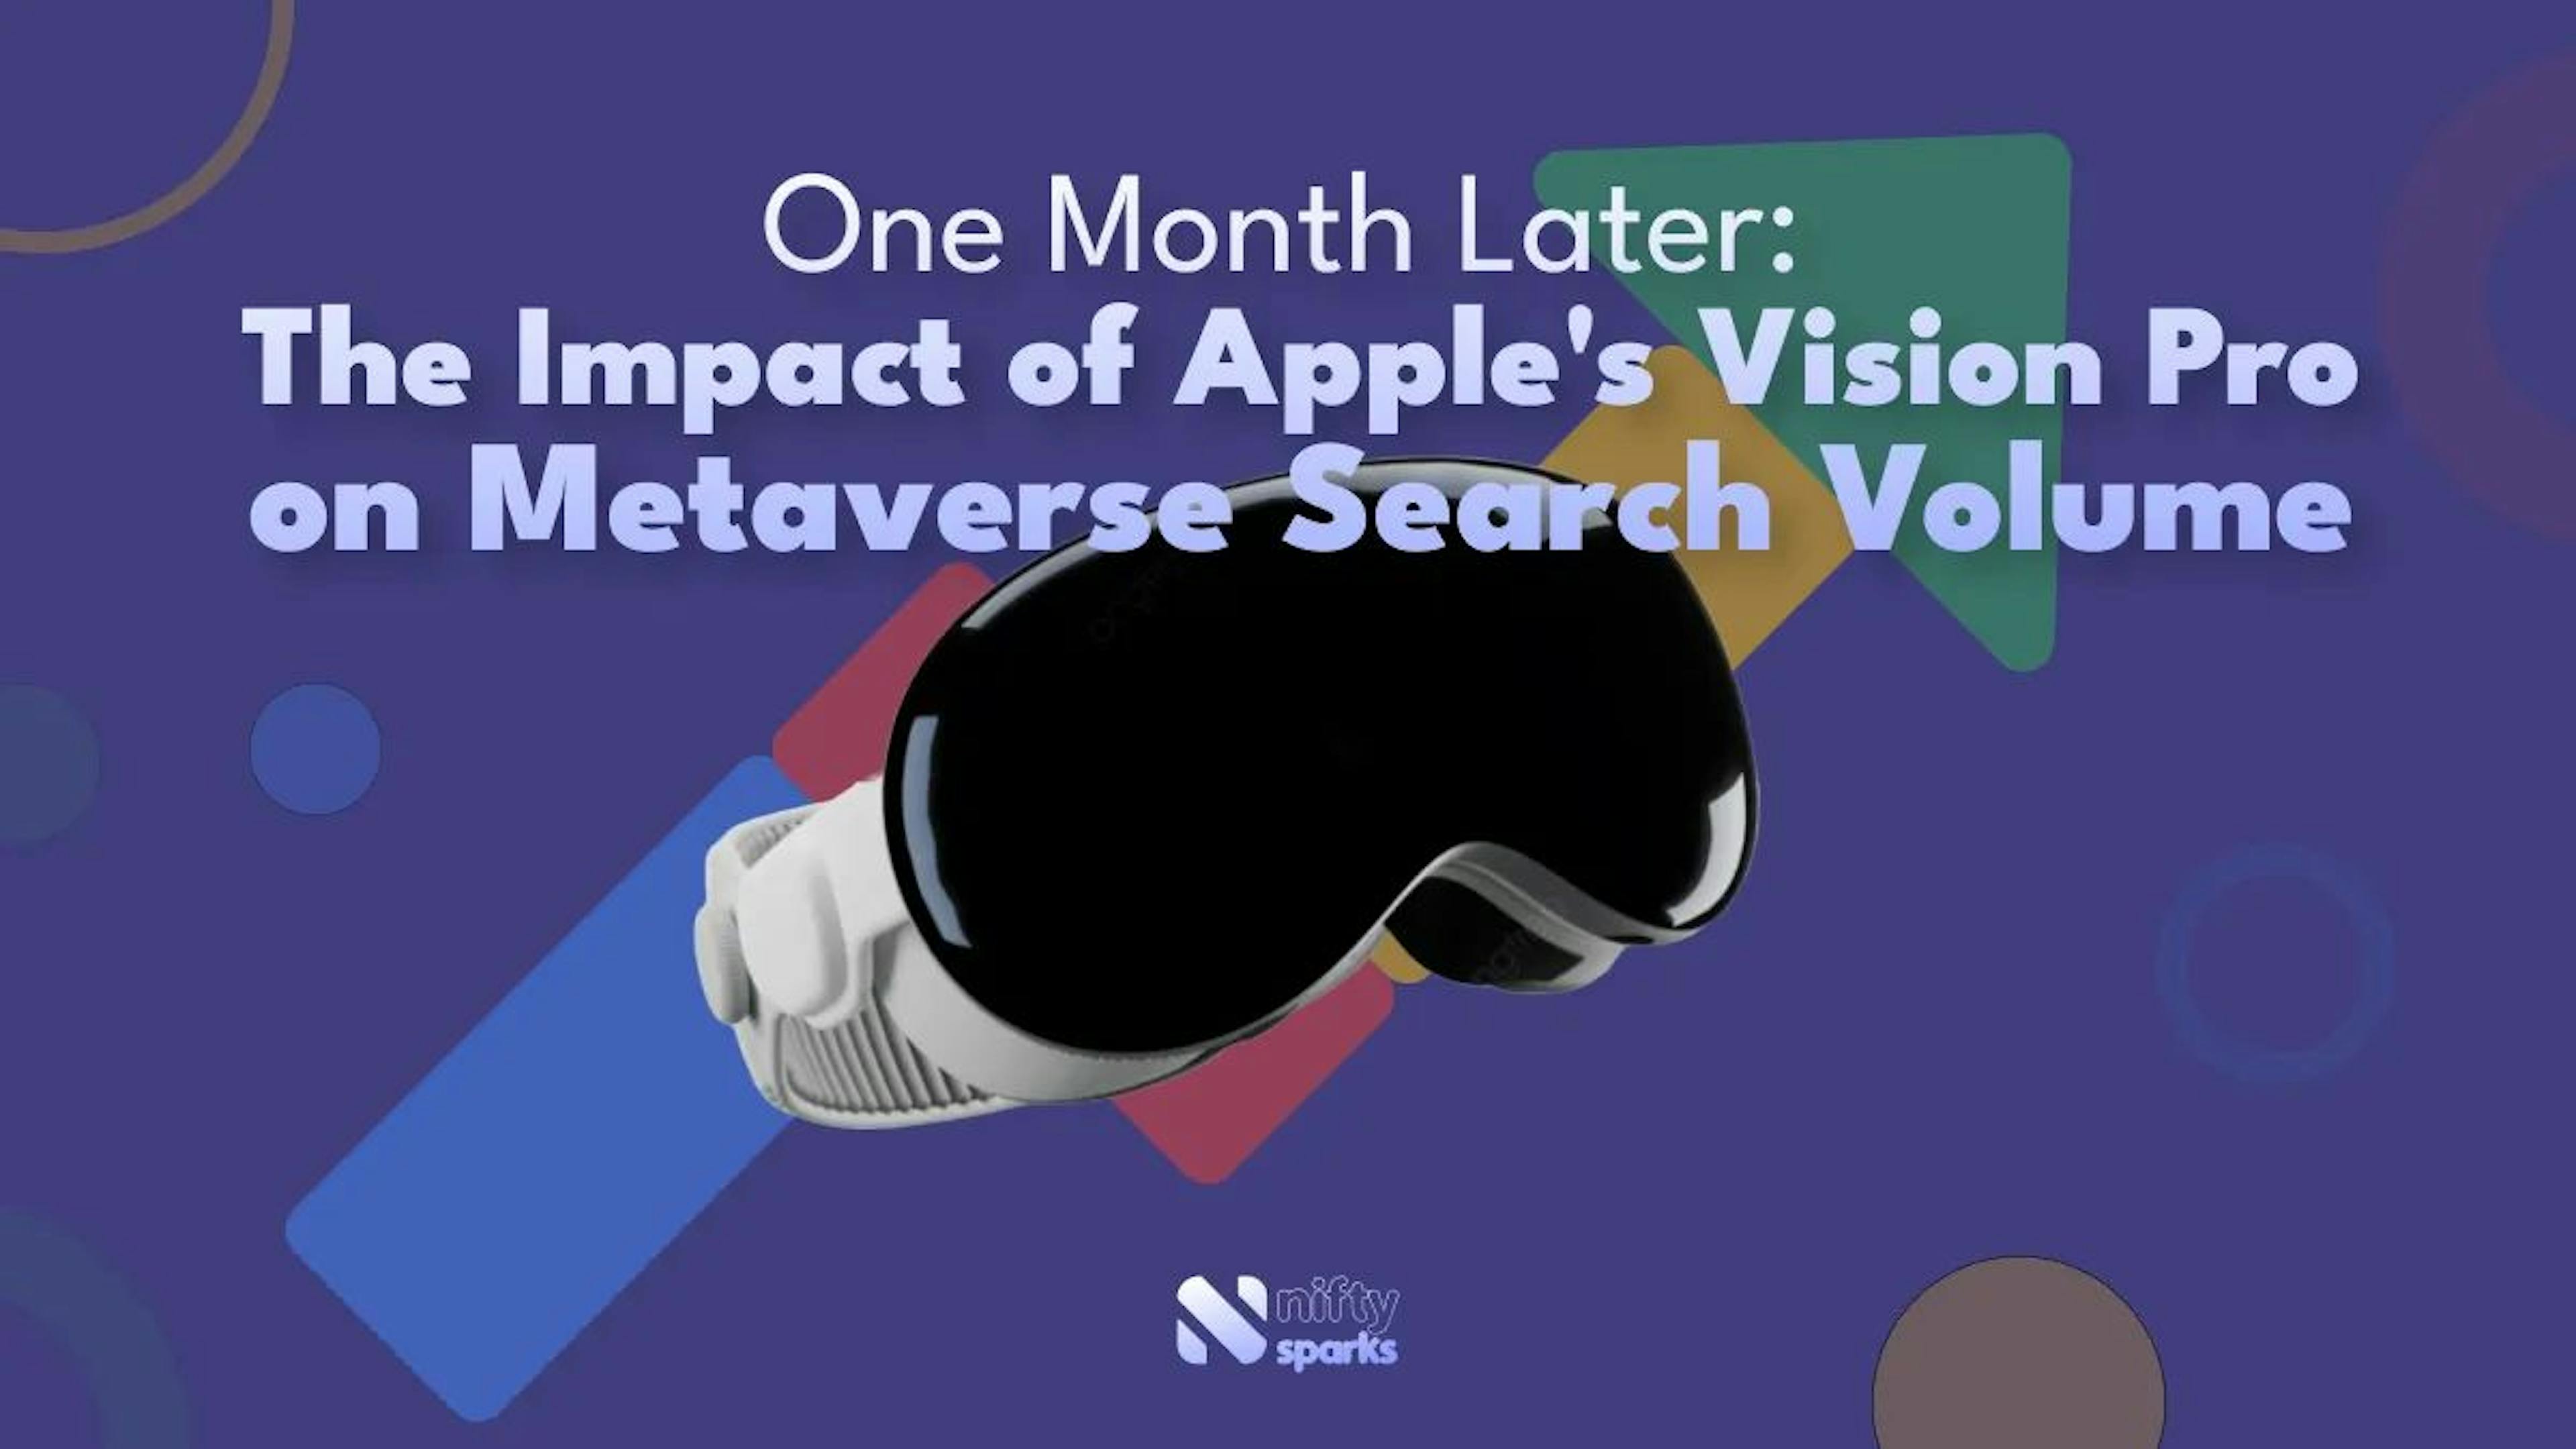 featured image - 1 Month Later: The Impact of Apple’s Vision Pro on Metaverse Search Volume